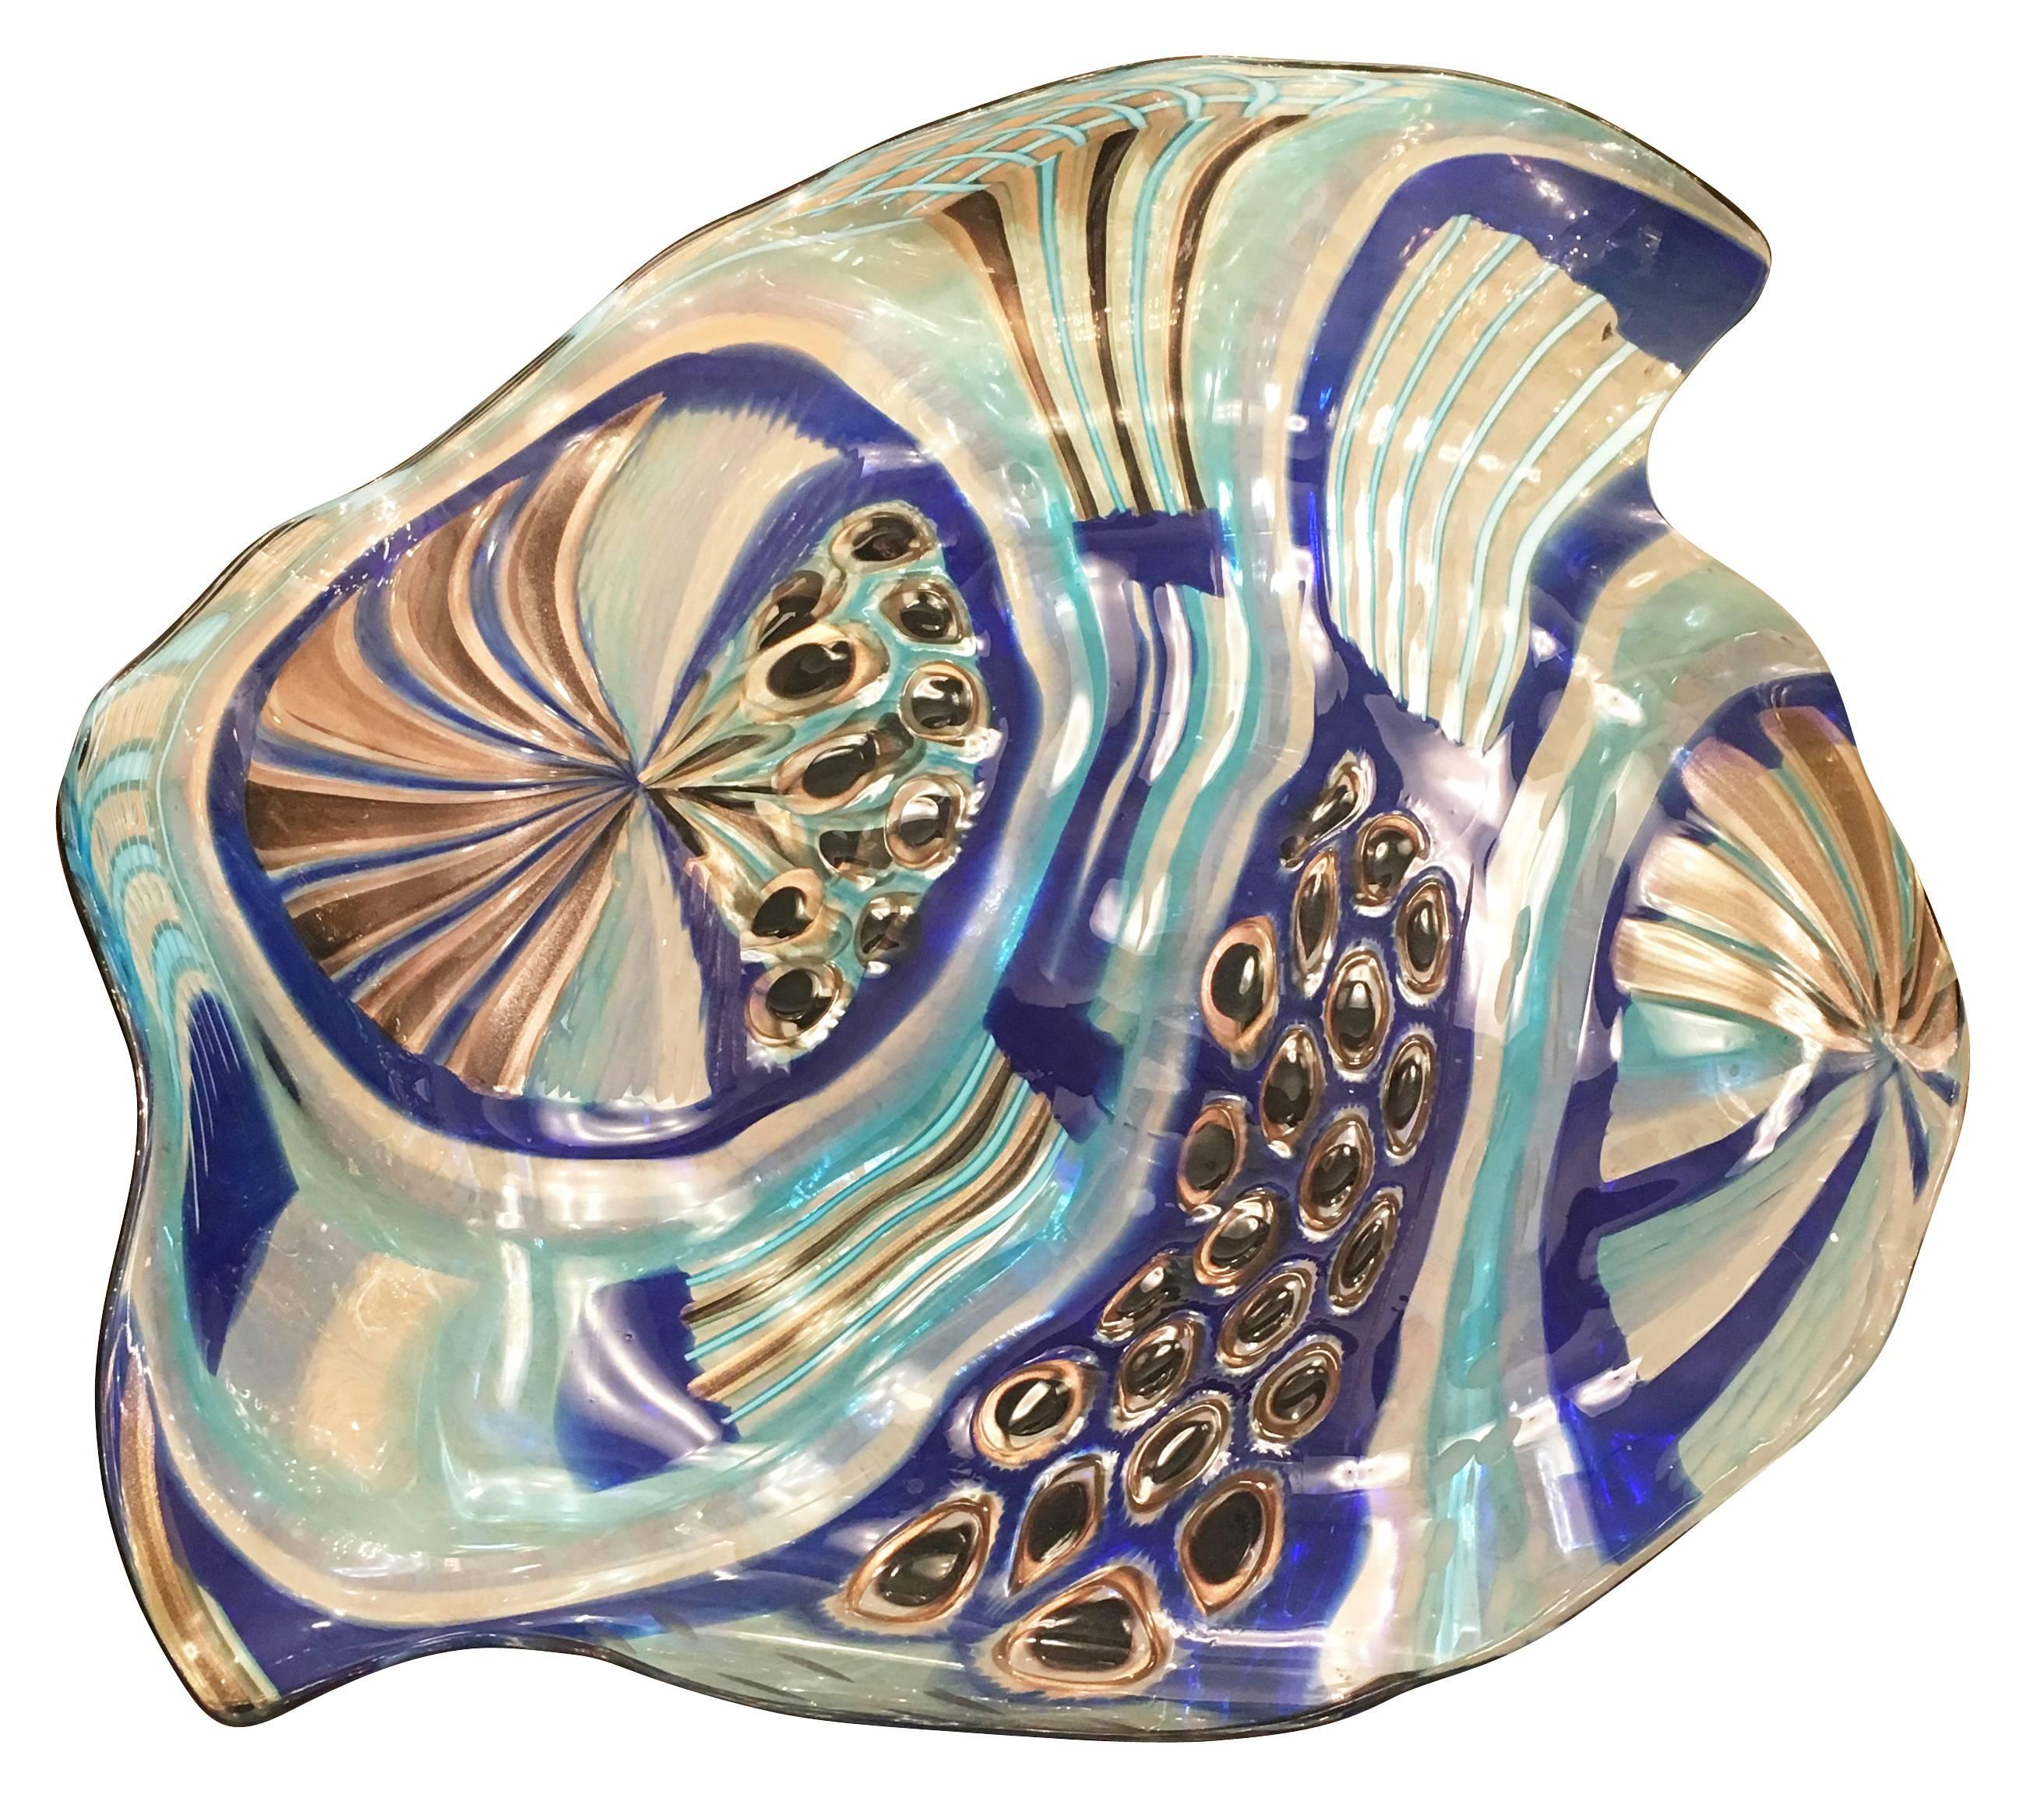 Colorful Murano glass centrepiece hand blown in an organic shape. The base is made of clear faceted glass.
